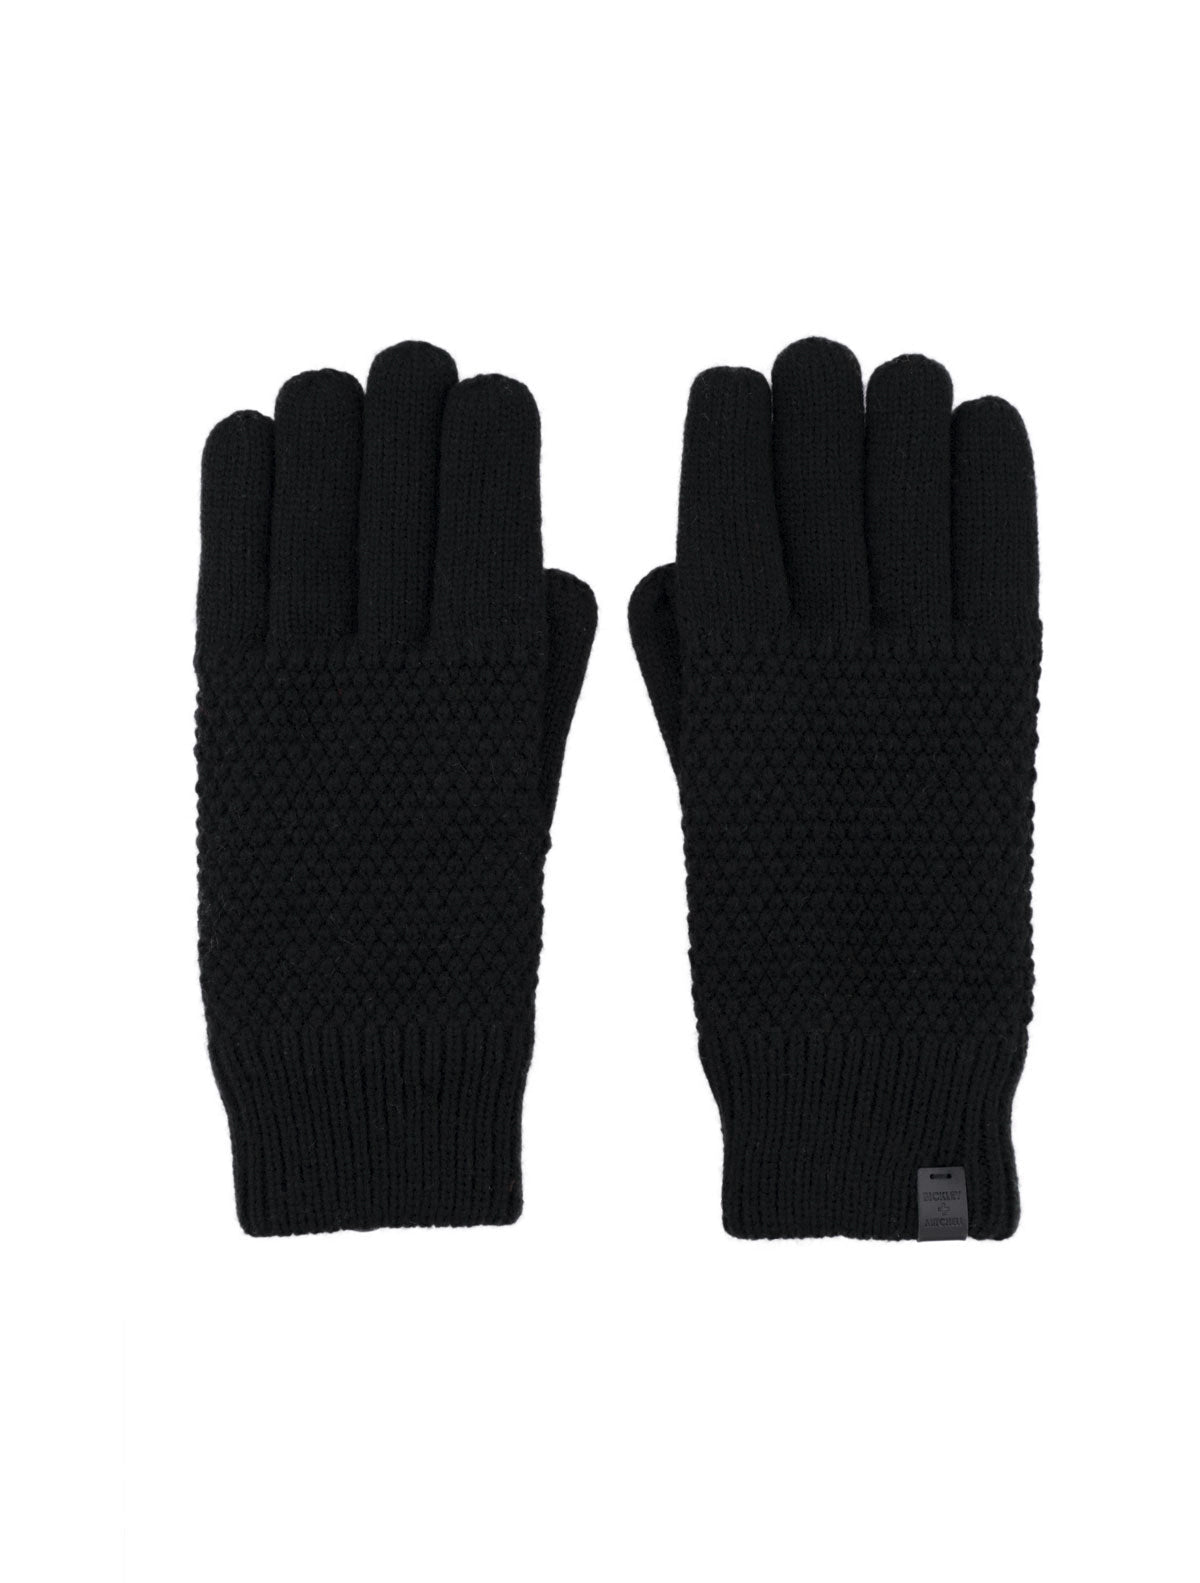 Classic moss-knitted gloves
with fleece lining